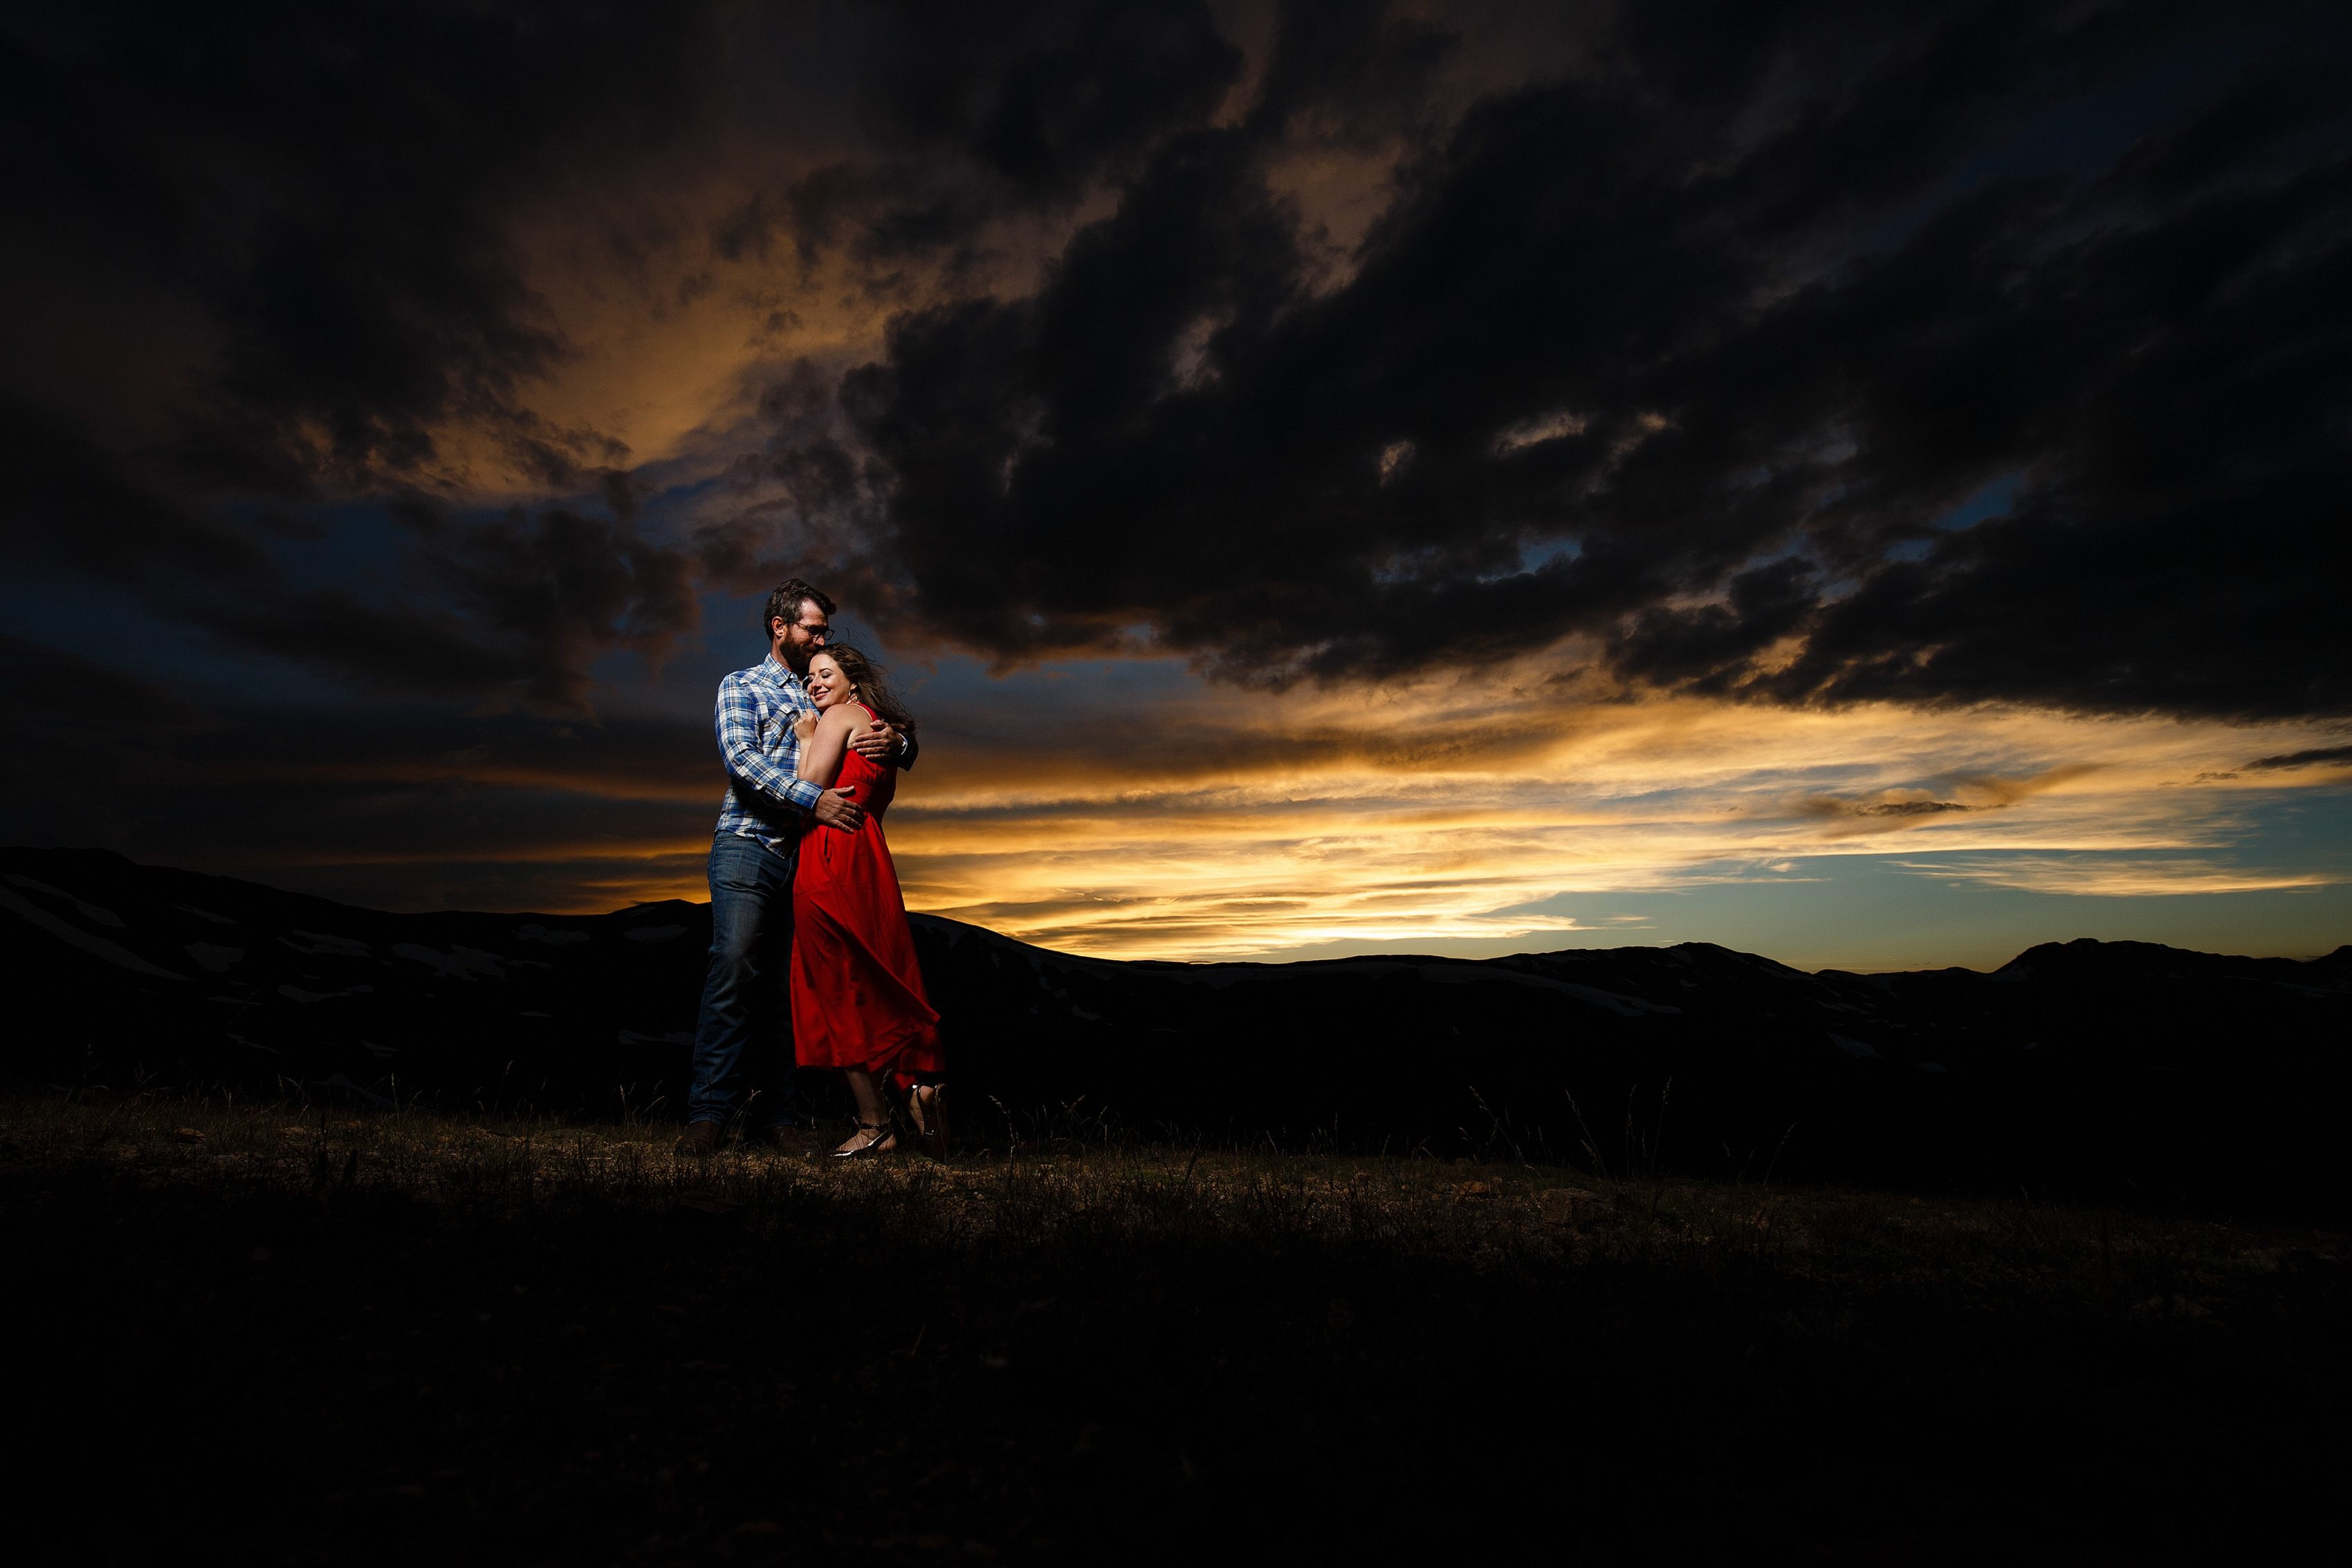 The sun illuminates a beautiful sunset as Mallory and Daniel pose during their summertime engagement photo session atop Loveland Pass near Keystone